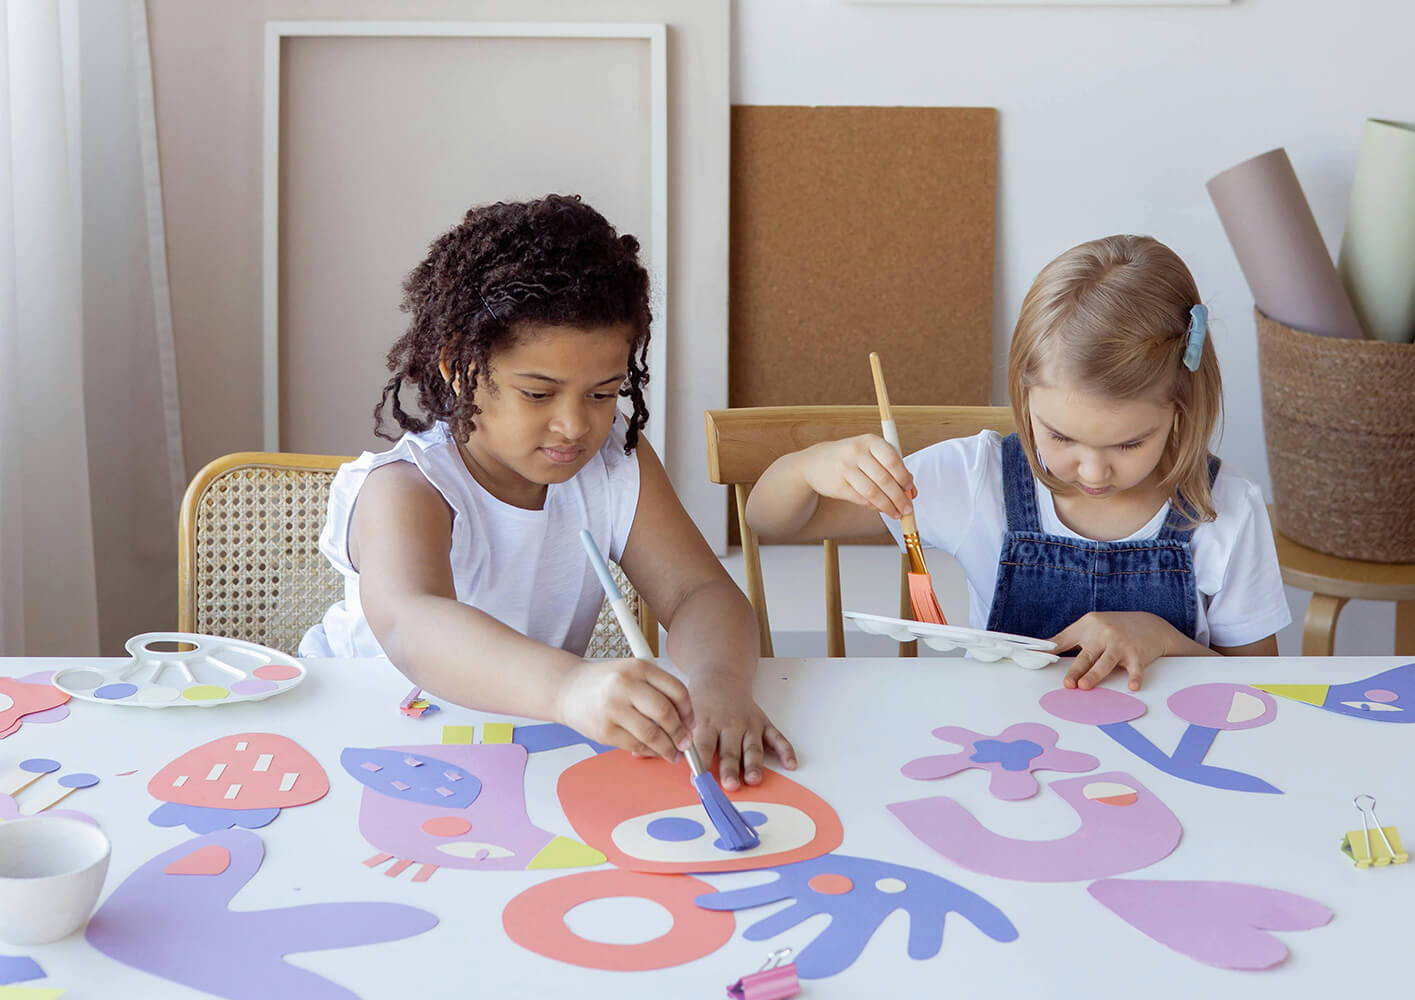 Arts and craft ideas for kids using household items